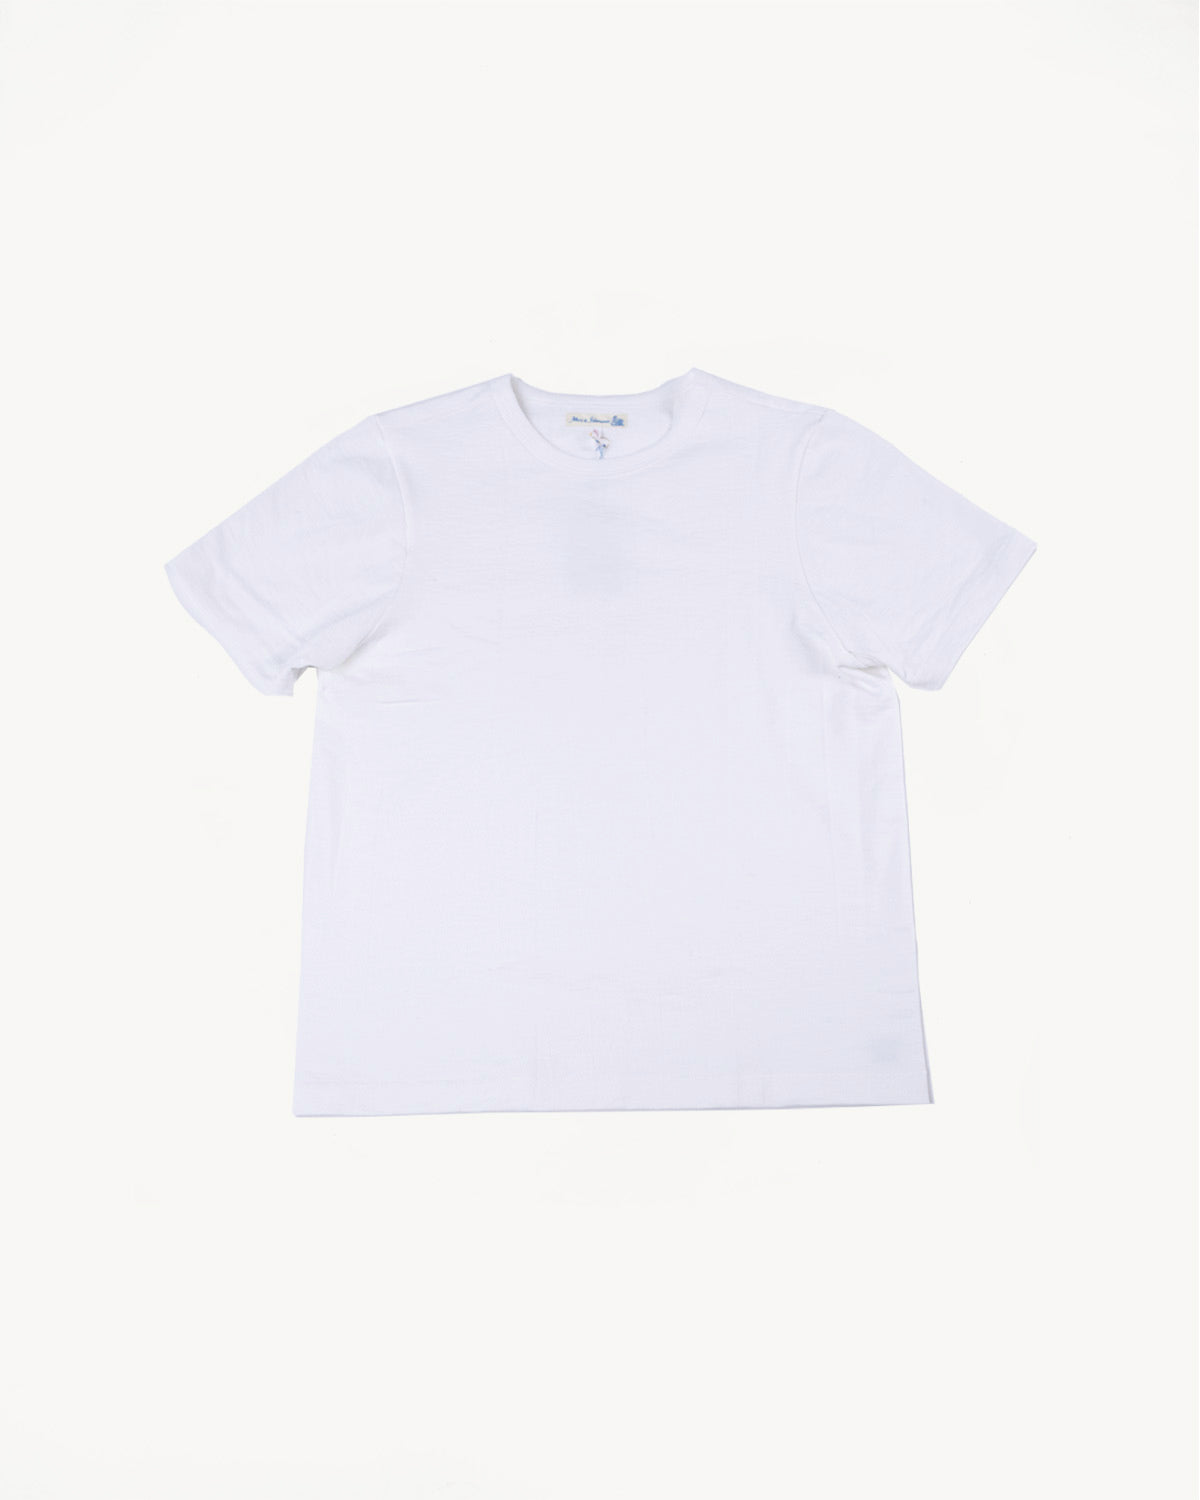 2S14.01 - 13.4oz Loopwheeled Heavy T-Shirt Relaxed Fit - White